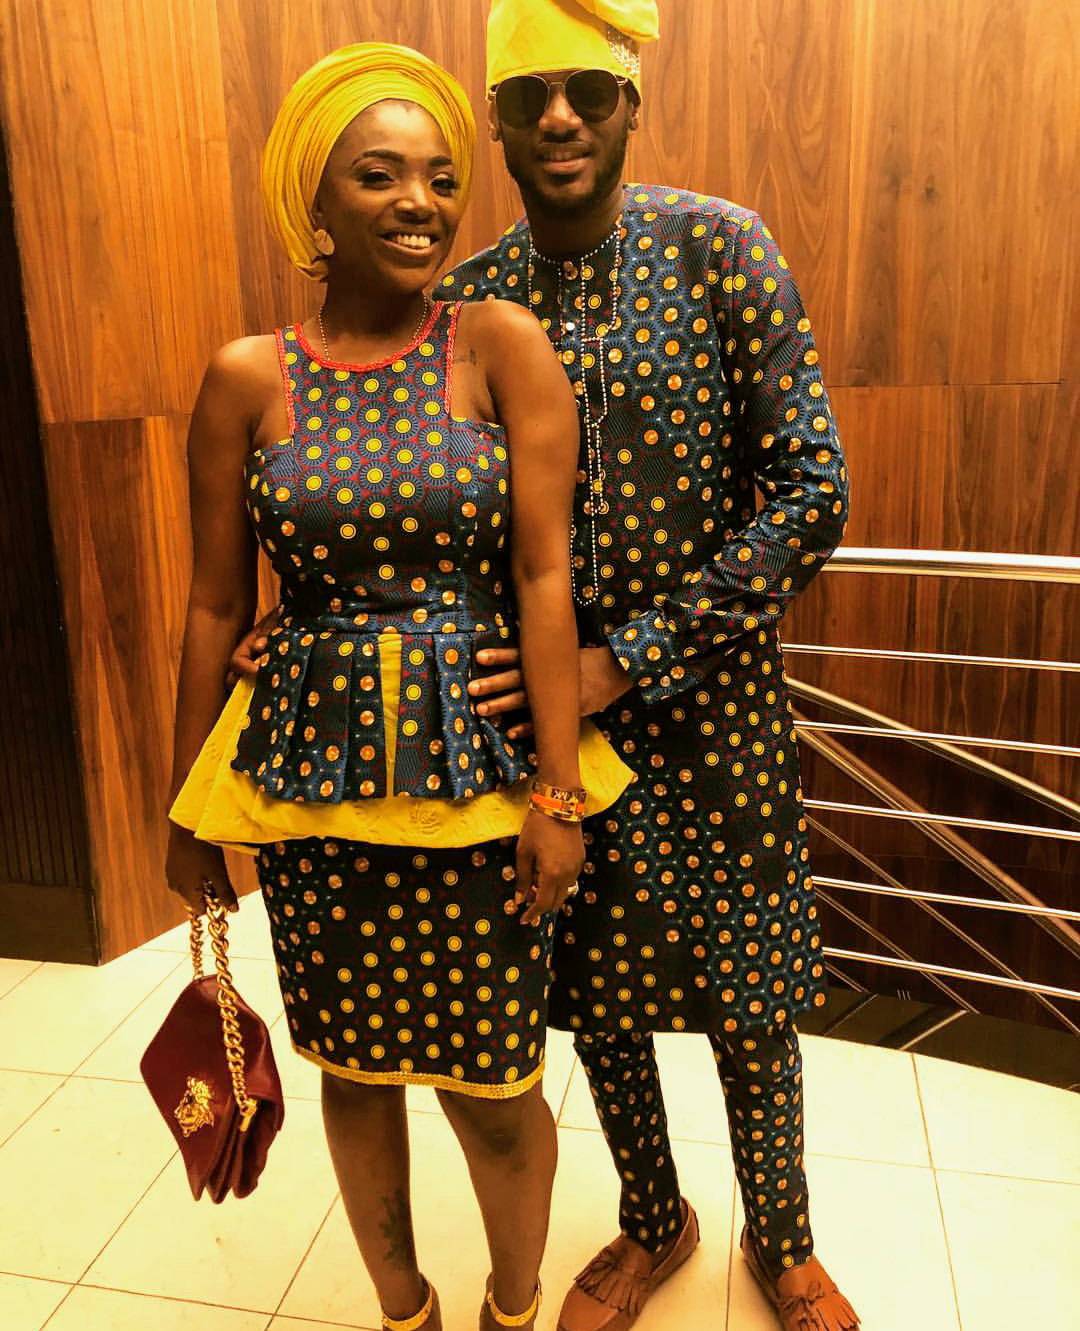 STUNNING COUPLE: 2BABA AND HIS GEORGOUS WIFE STUNS IN ANKARA PRINTS